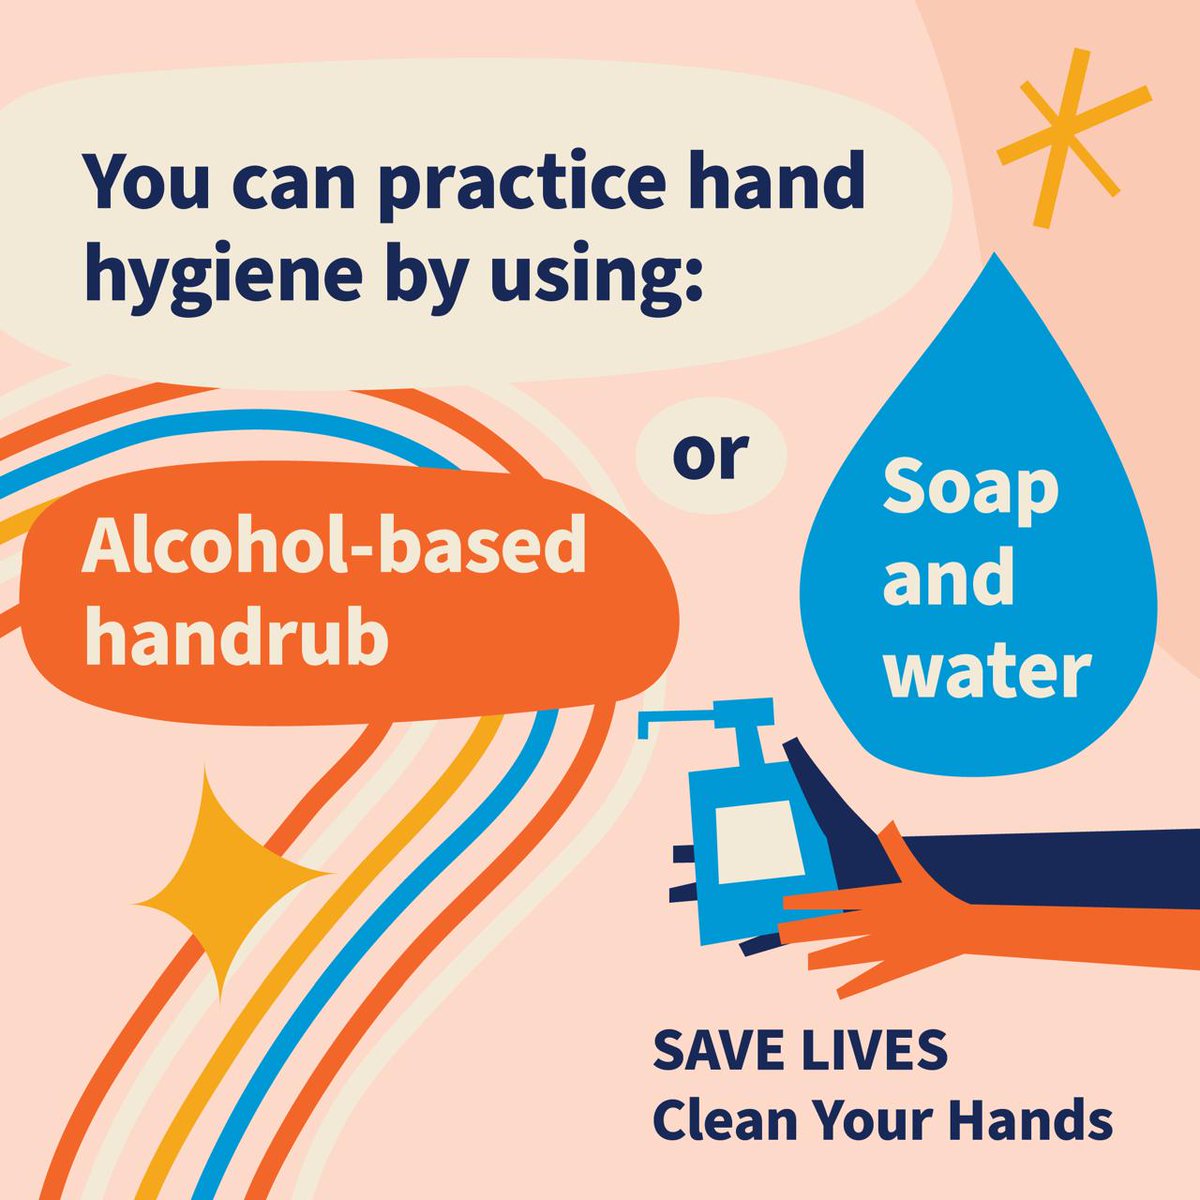 📢 It's #WorldHandHygieneDay,  Let's raise awareness about the importance of handwashing in #infection prevention and control to promote good health.
Together, let's pledge to make hand hygiene a priority every day. 
#CleanHandsSaveLives @AfricaCDC #InfectionPrevention #ActonAMR